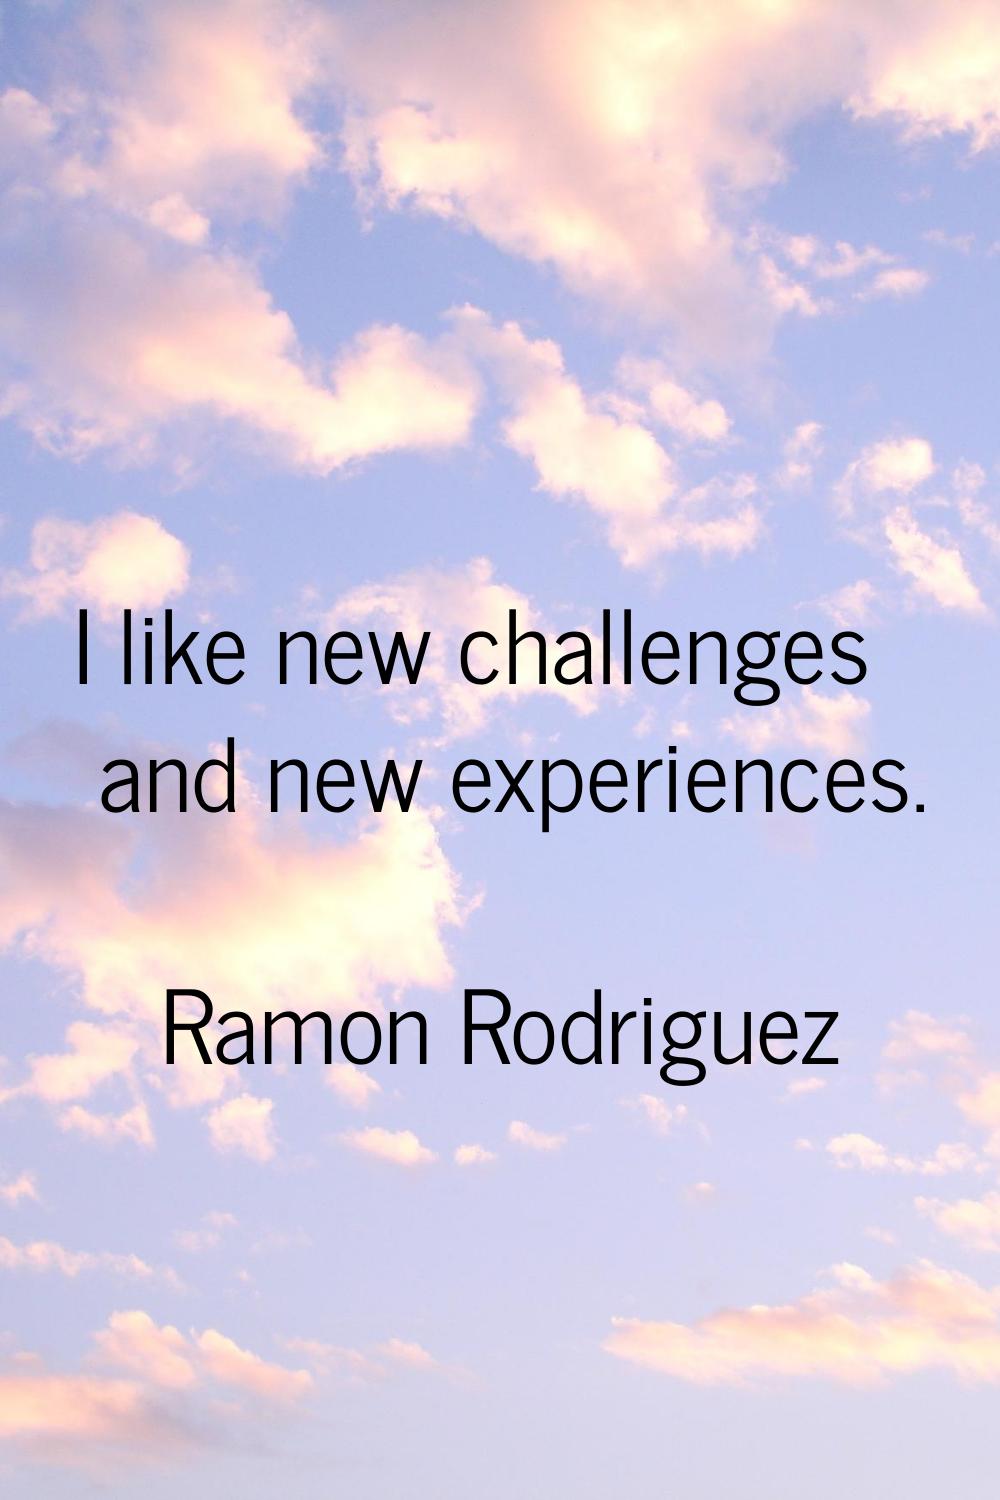 I like new challenges and new experiences.